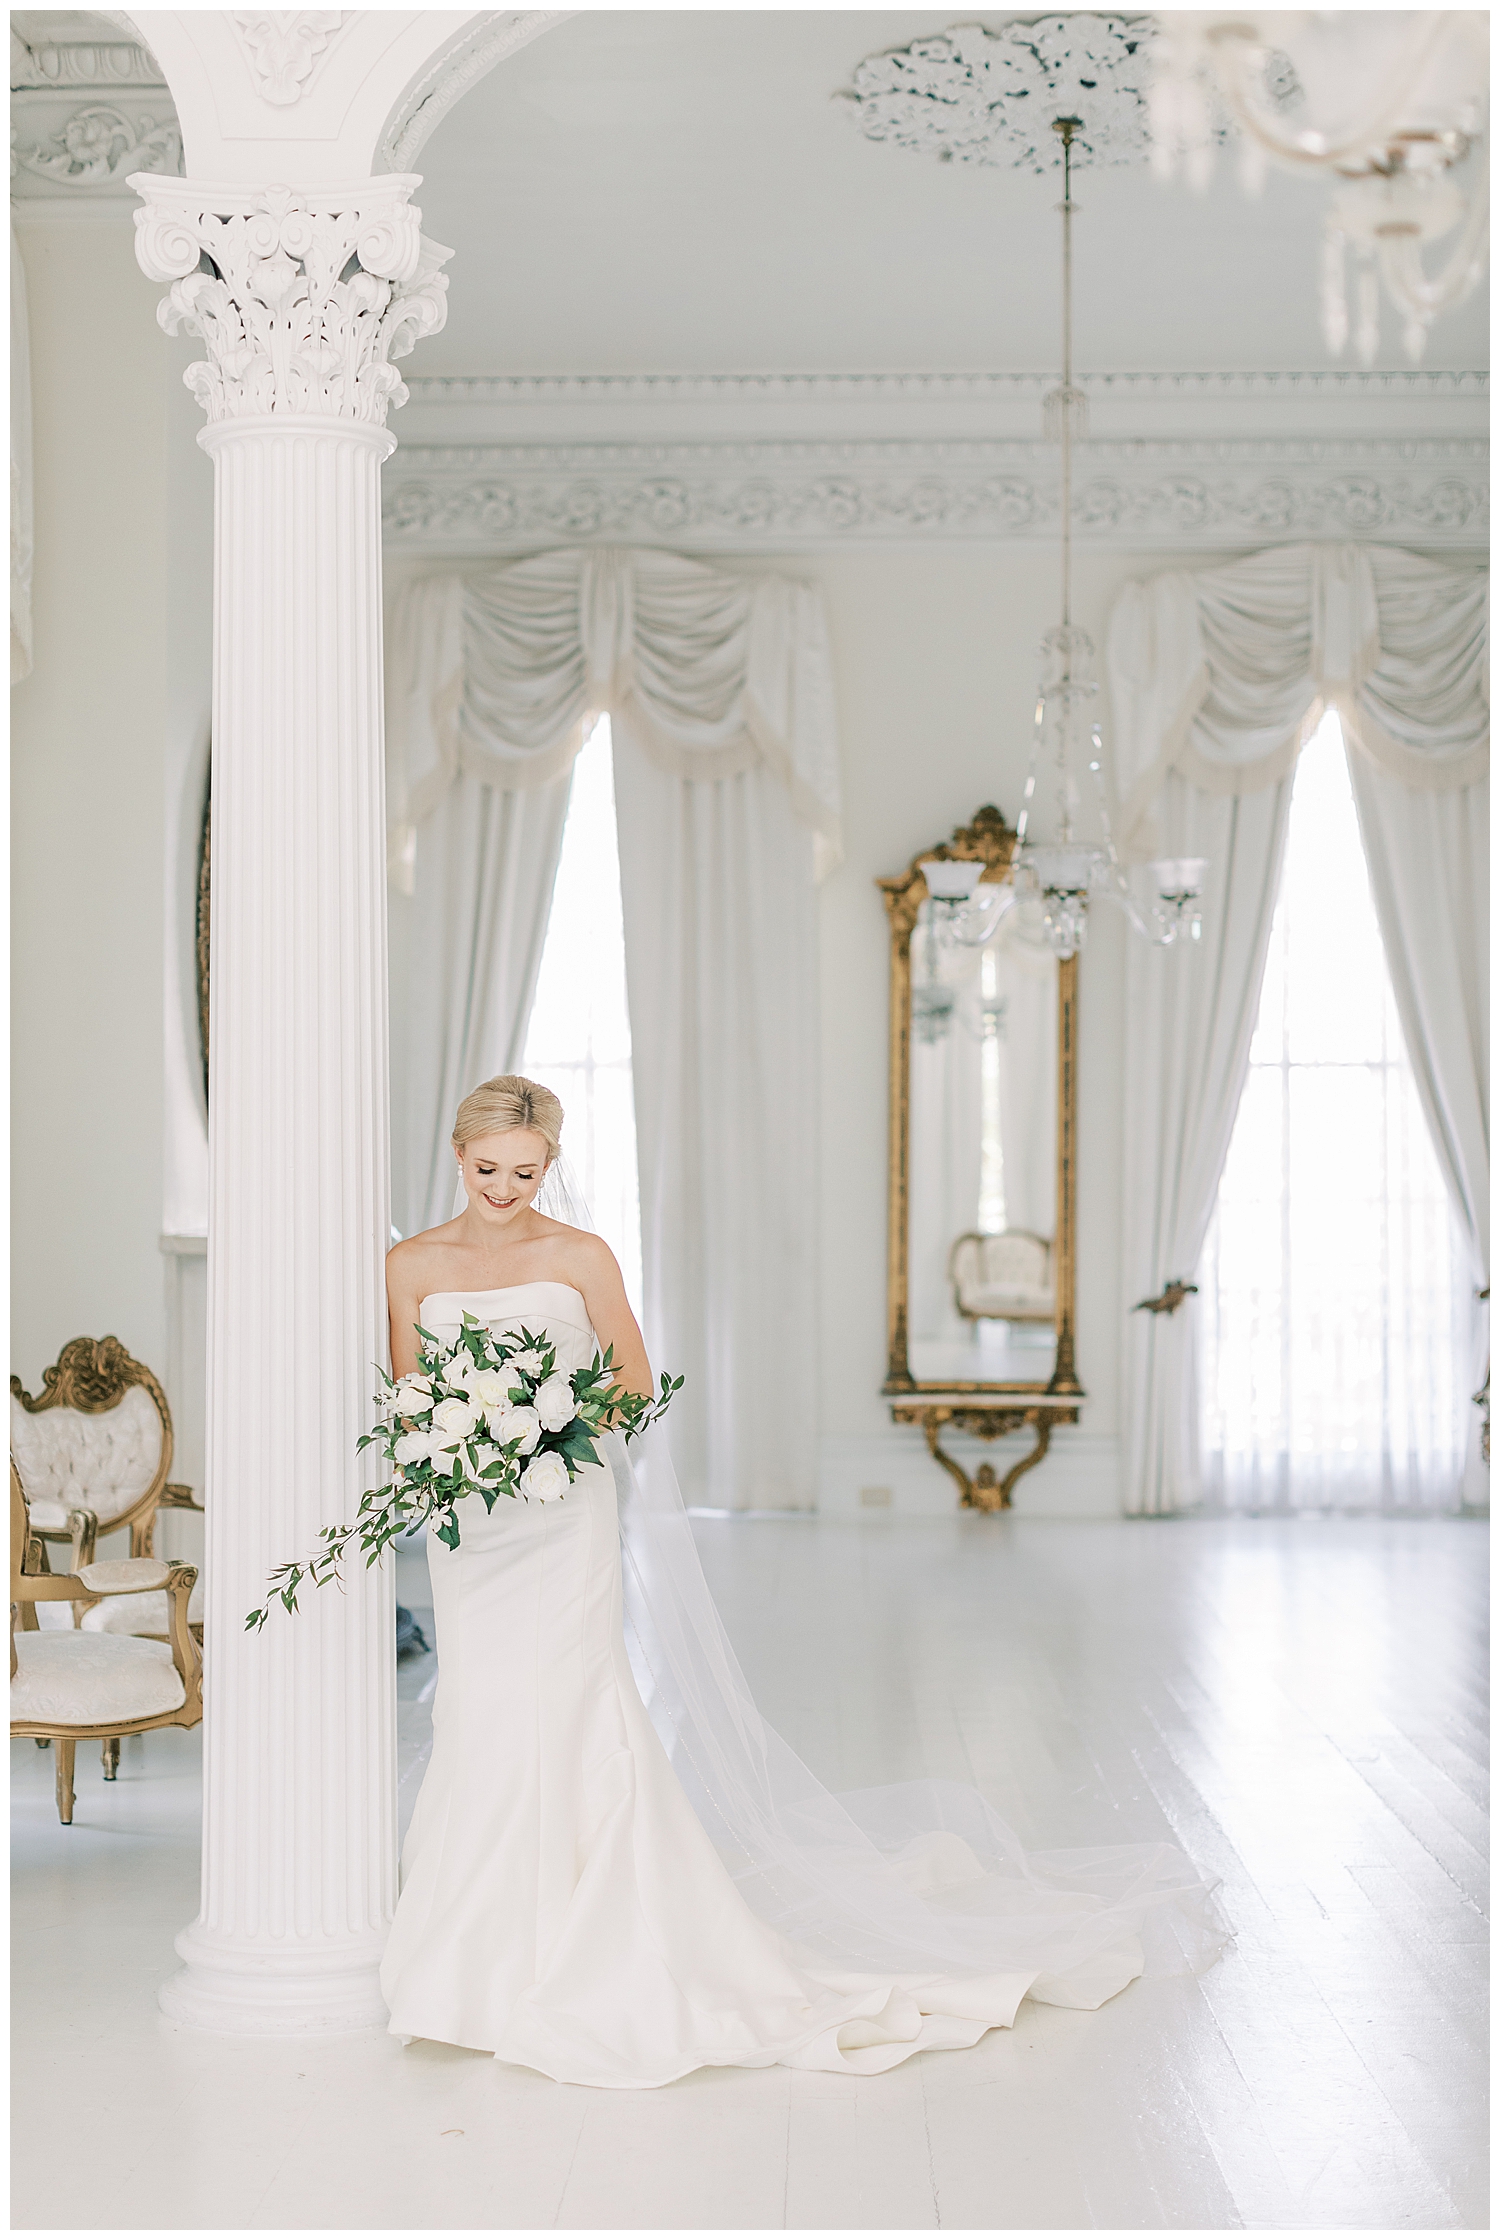 A bride holds her bouquet leaning against a large white column in a white room.